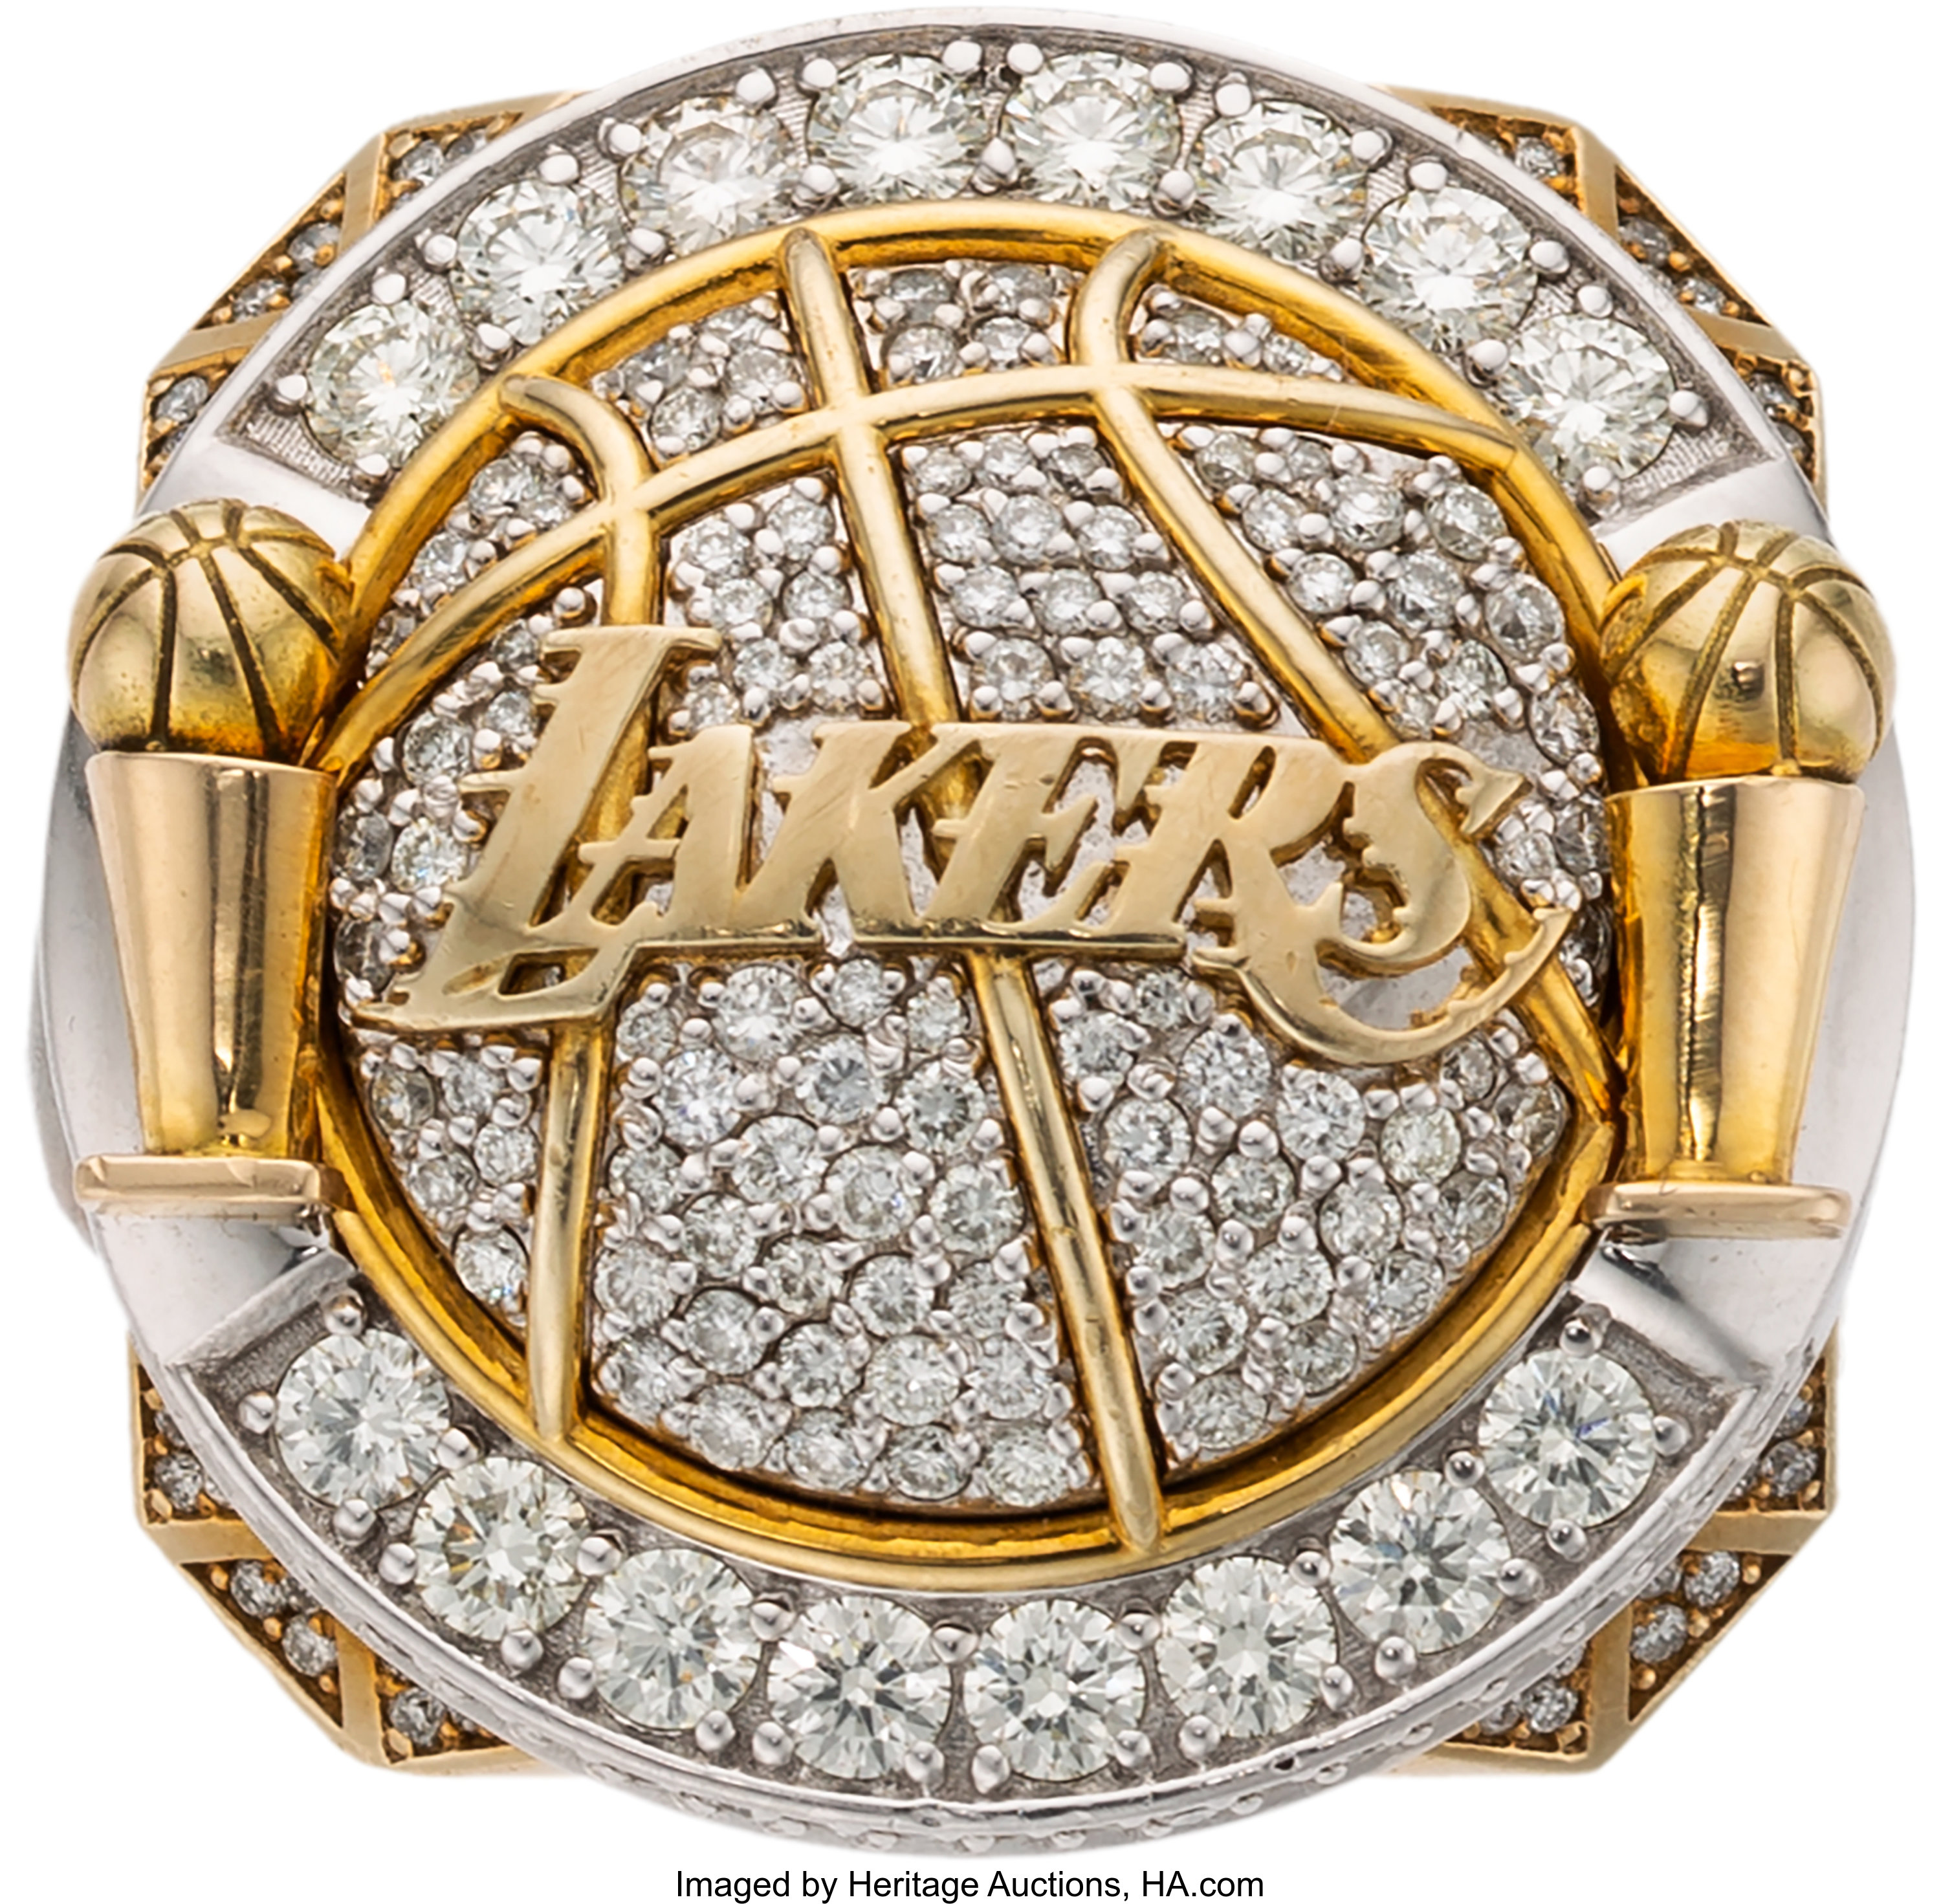 2010 Los Angeles Lakers Nba Championship Ring Presented To Forward Lot 50123 Heritage Auctions